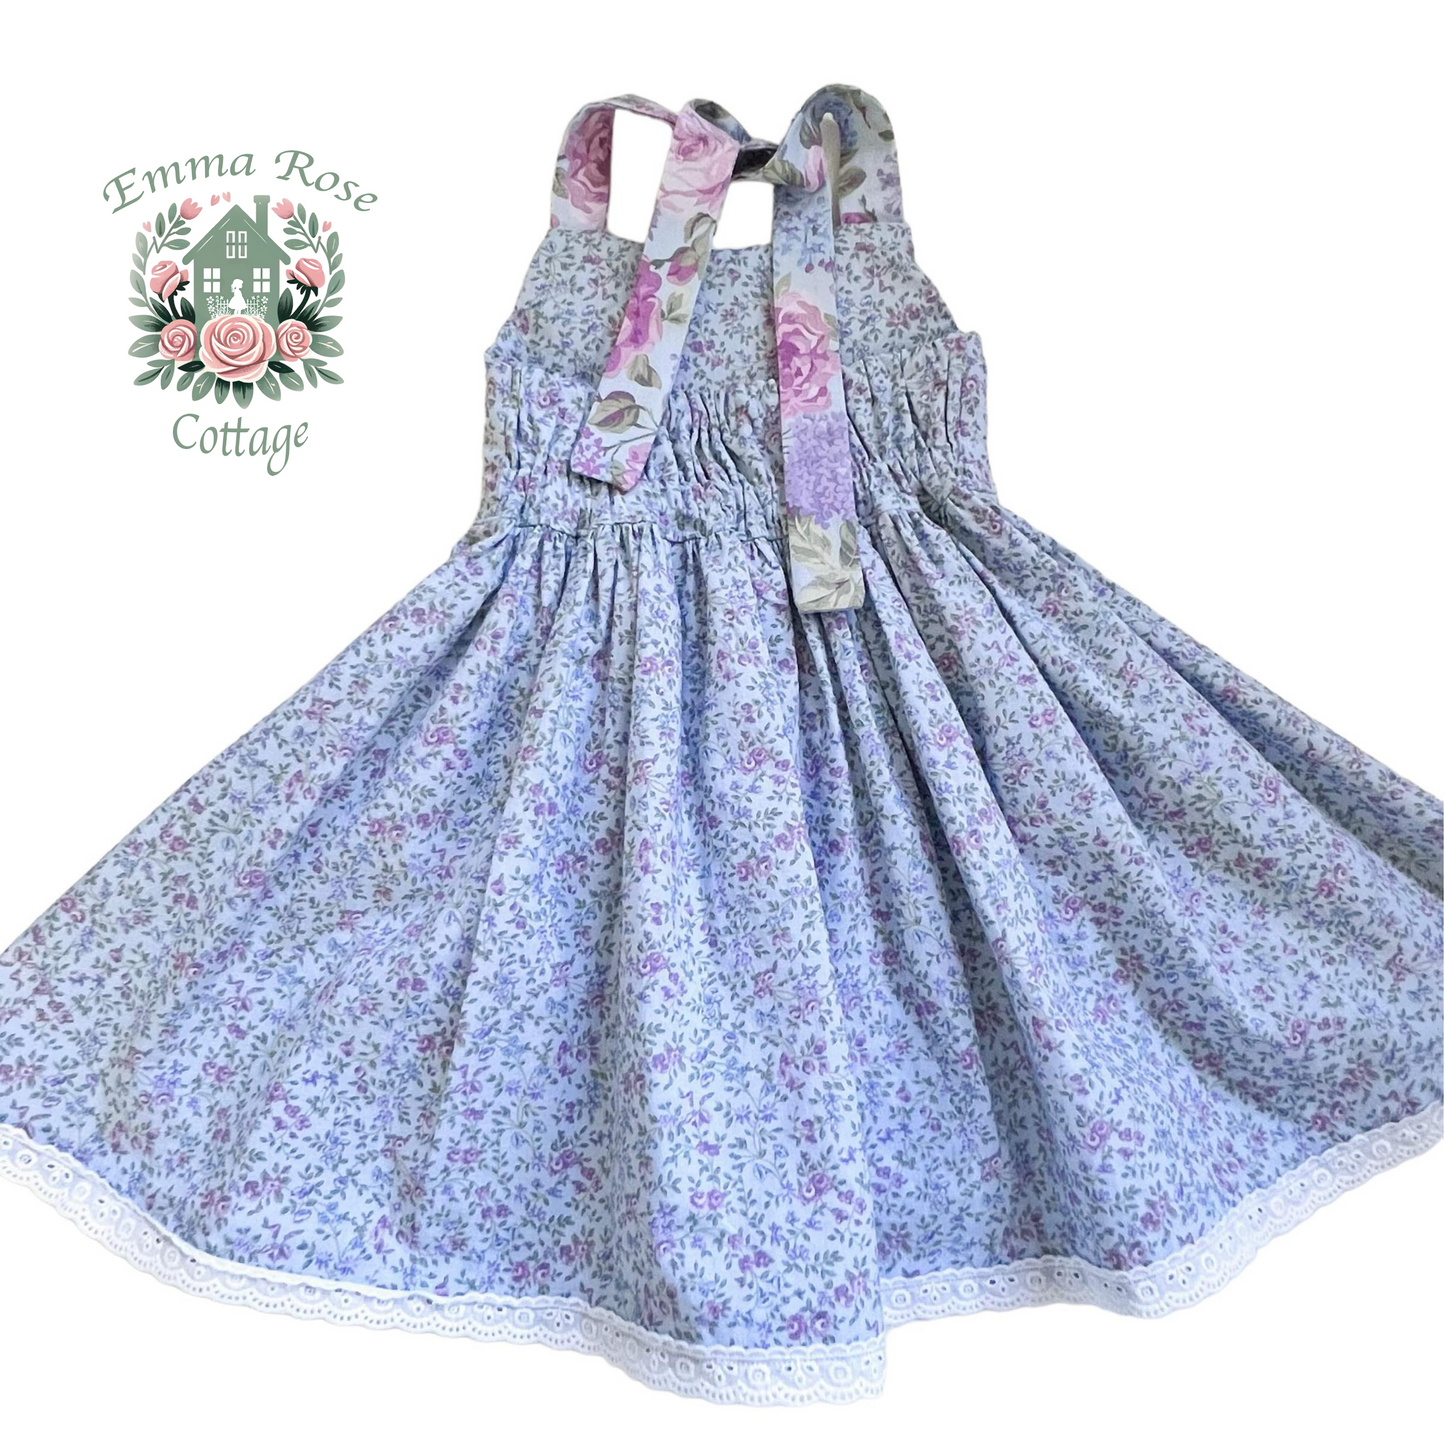 Floral Dress & Bonnet Ready to Ship Size 2T - Made to order are available